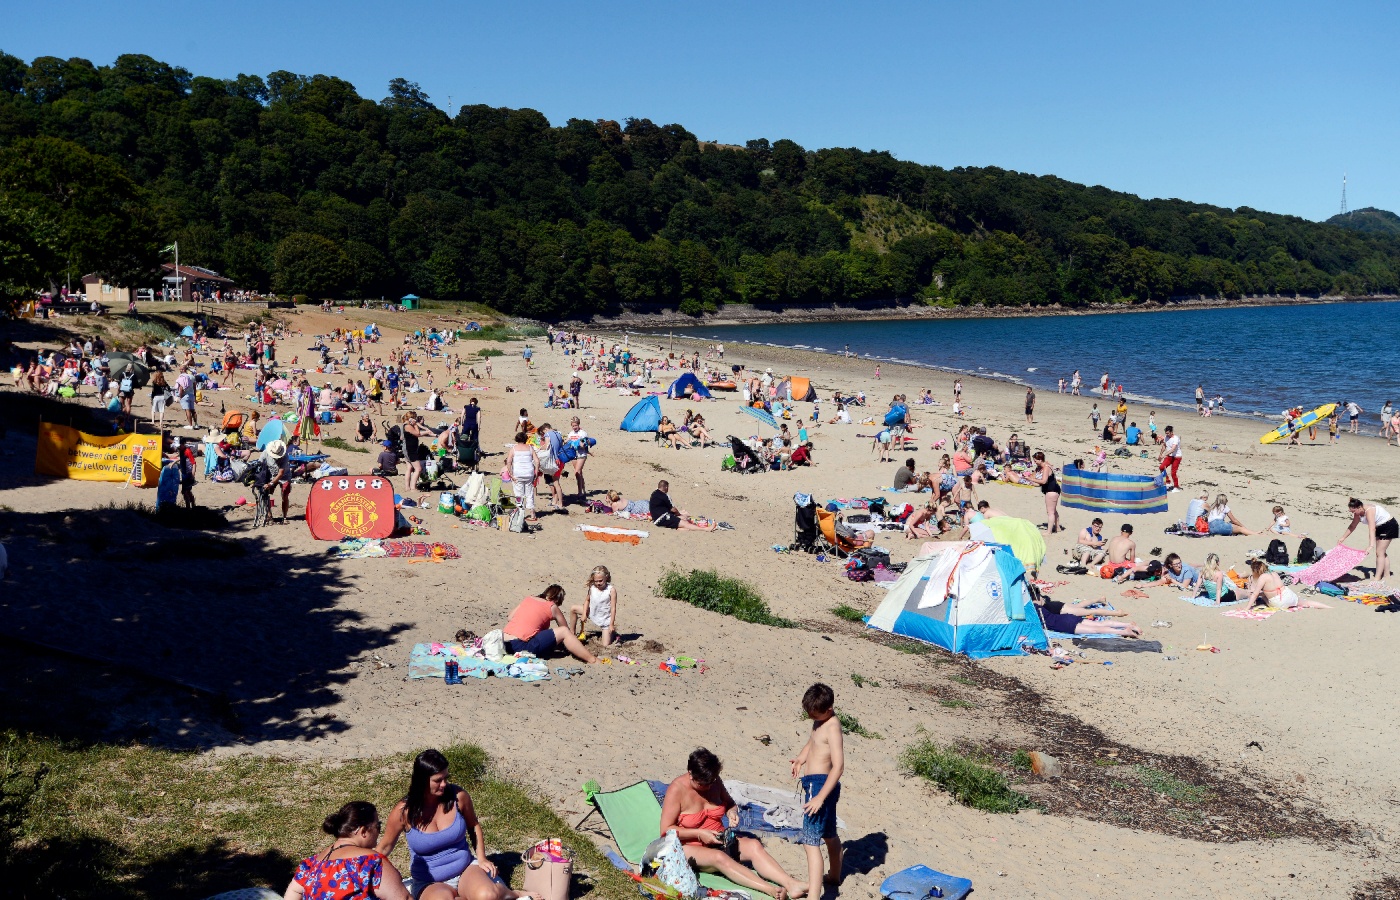 Scotland has been hit with scorching temperatures this week.